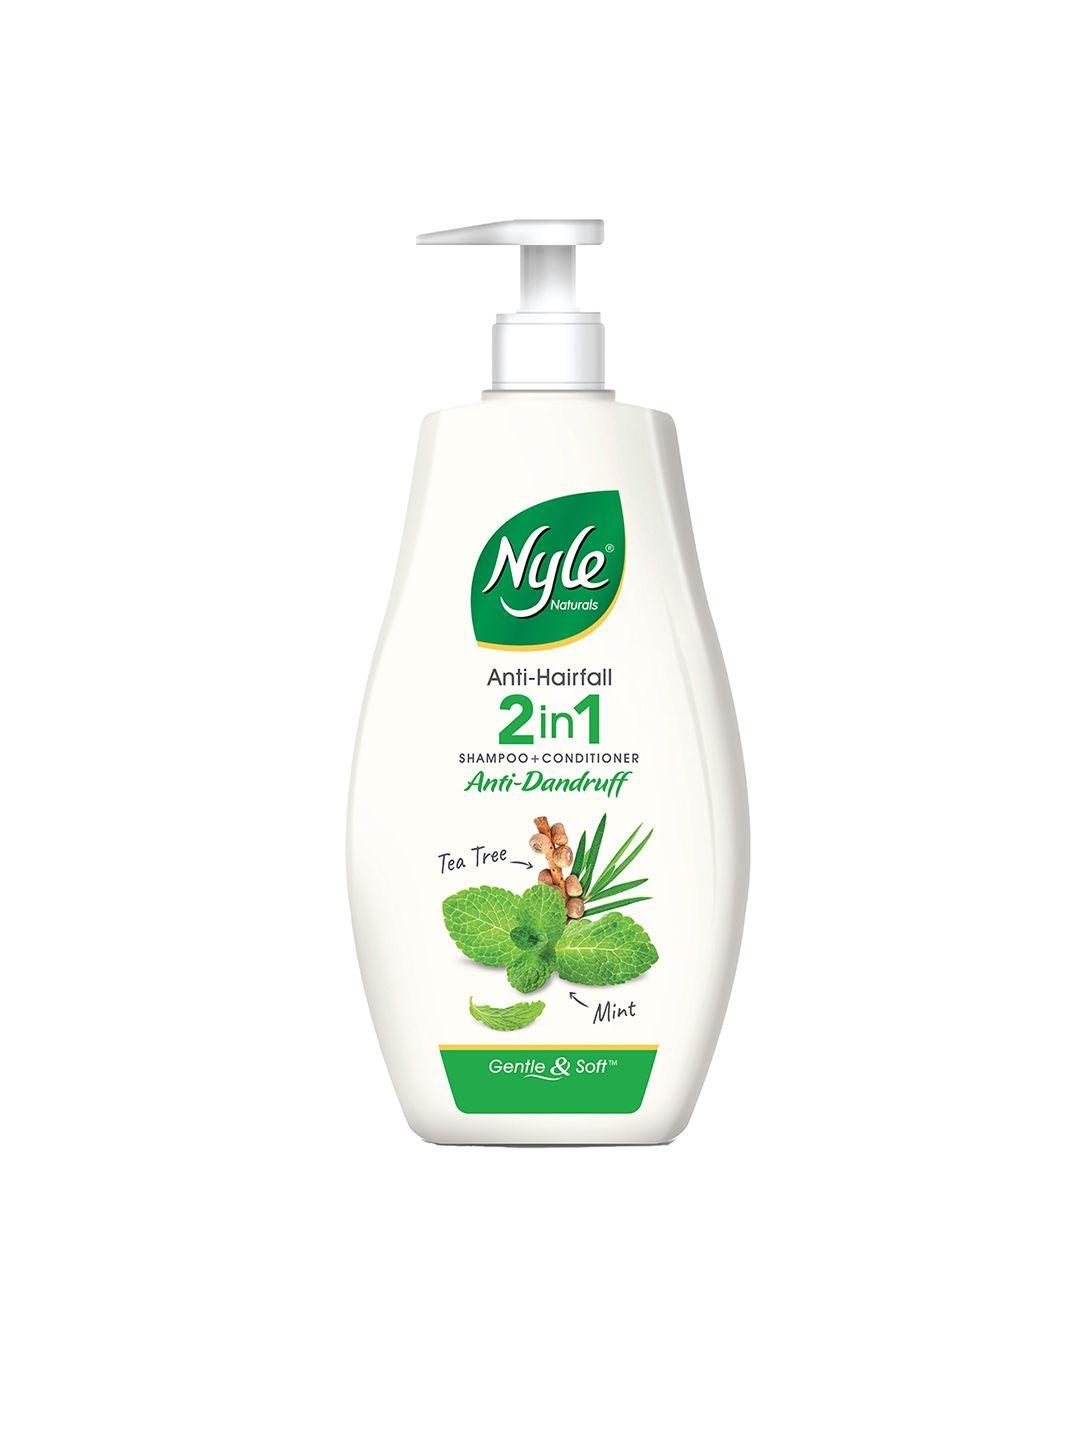 nyle naturals anti-dandruff 2-in-1 shampoo+conditioner with tea tree & mint - 400 ml